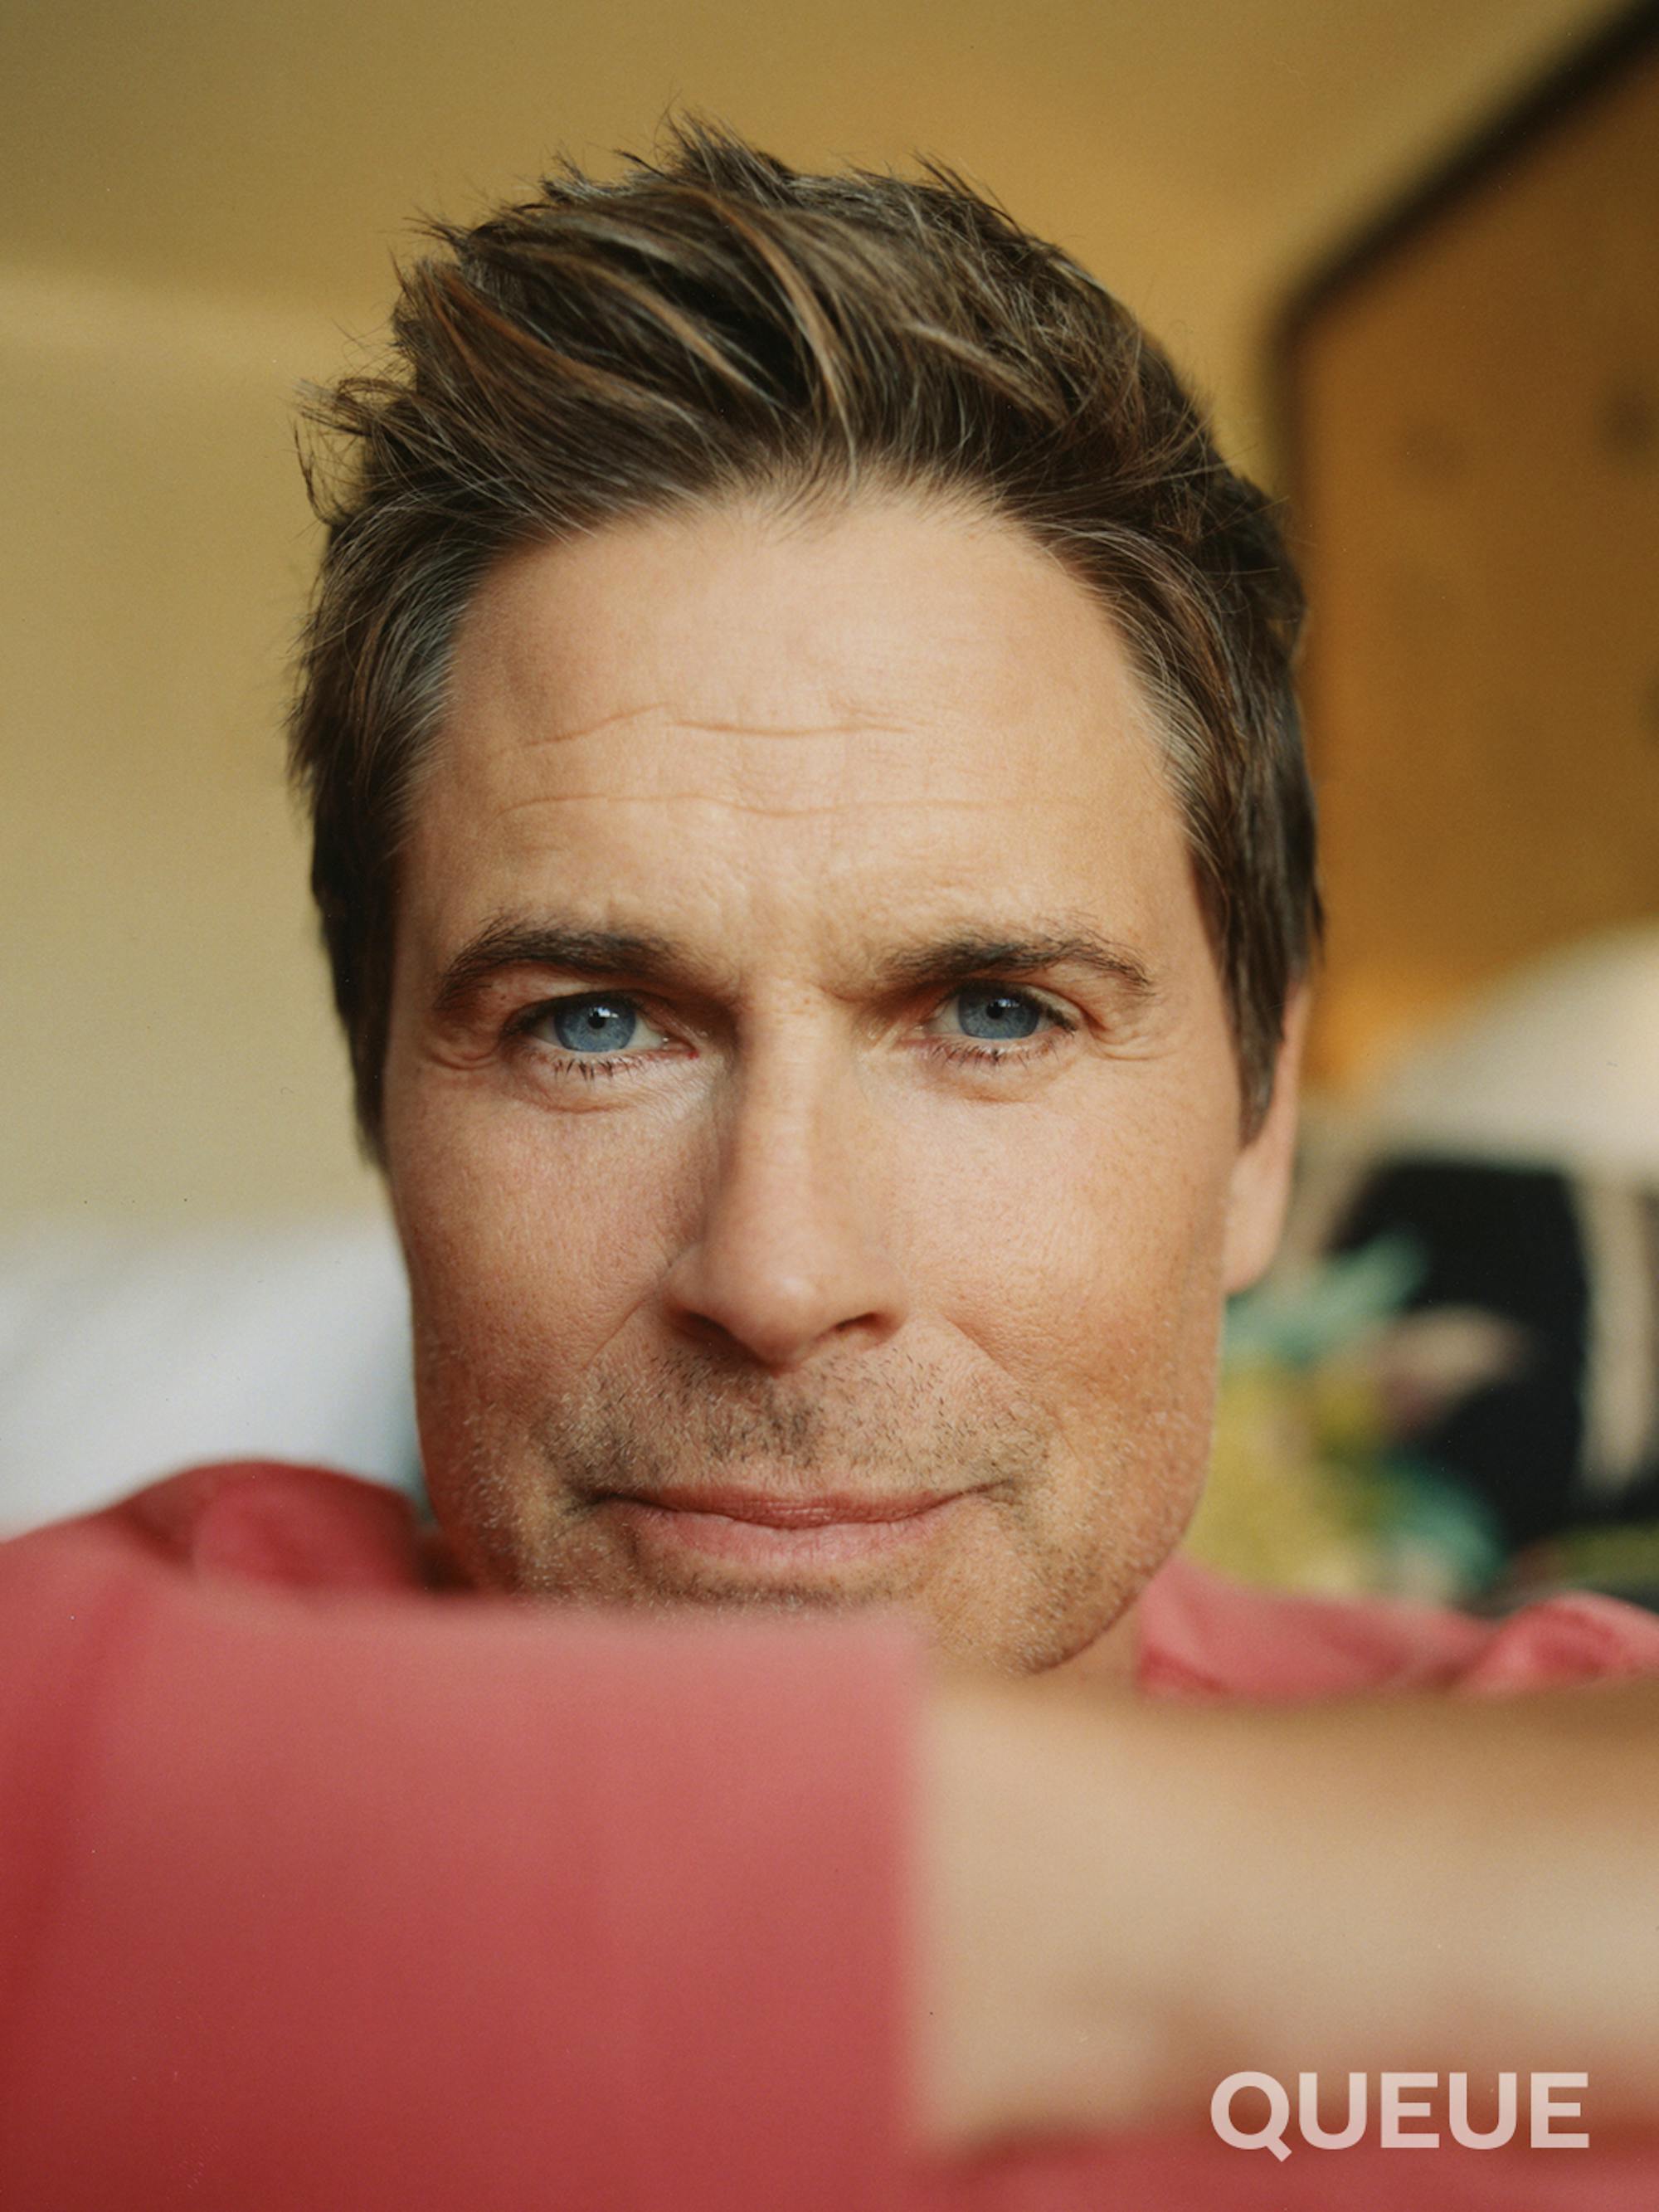 Rob Lowe gets close to the camera, smizing. He wears a red sweater.